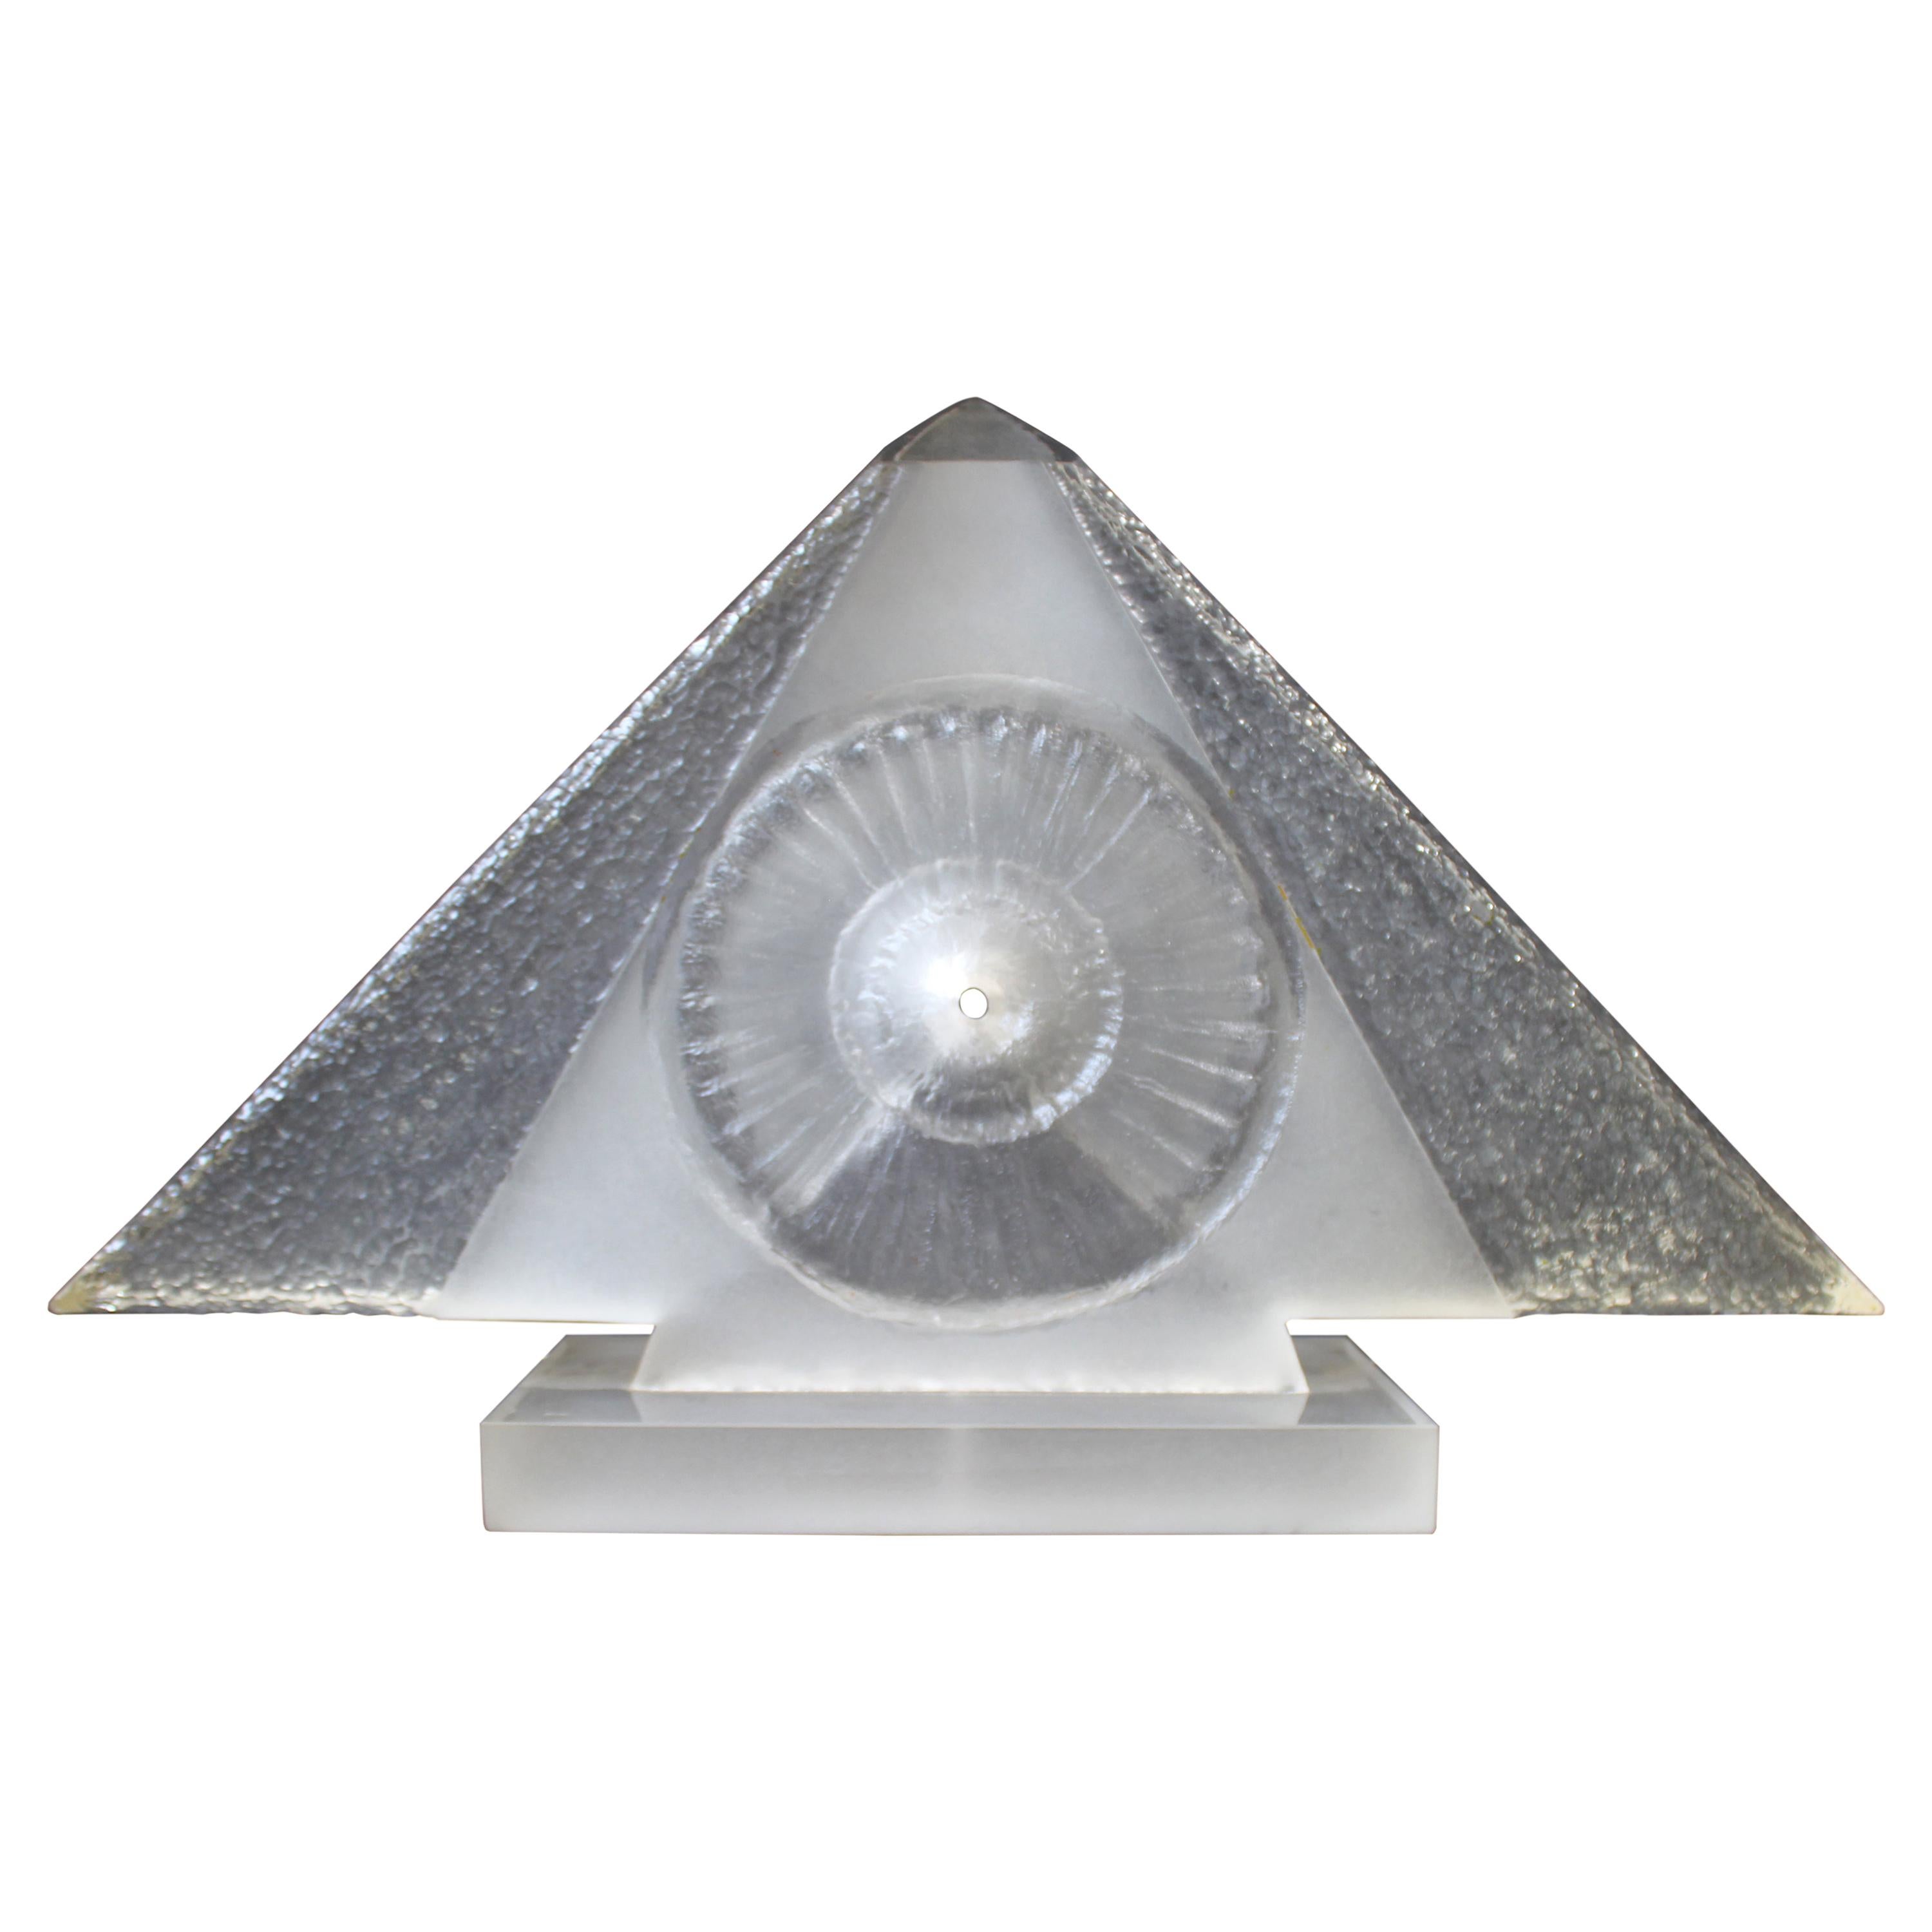 James Nani Untitled Contemporary Pyramid Lucite Sculpture For Sale